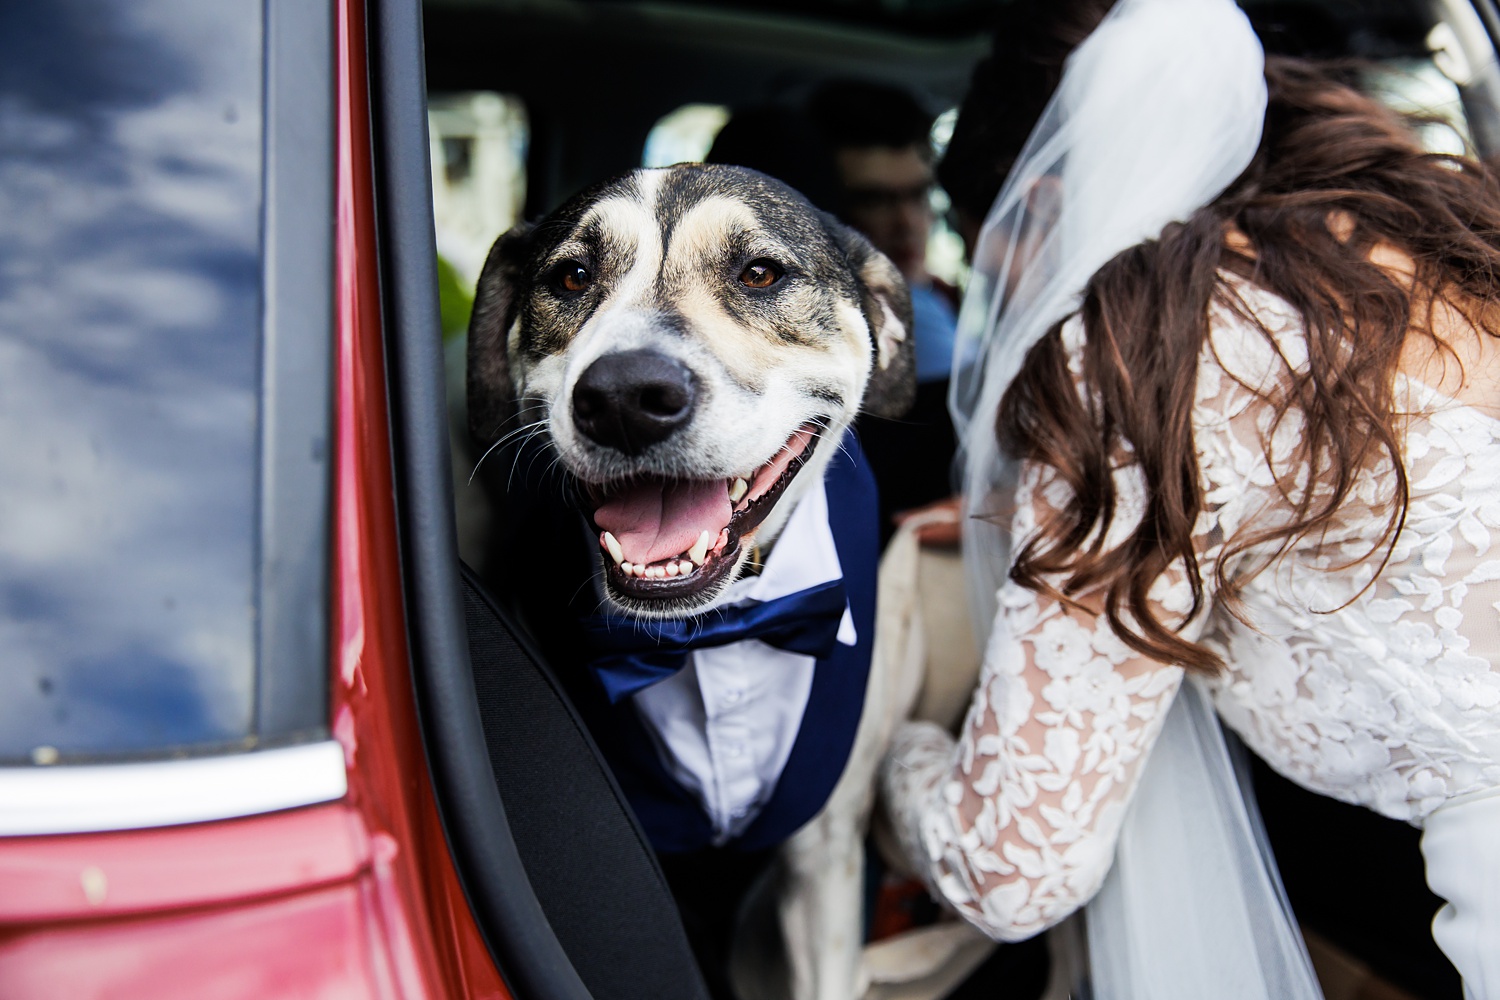 The couple's dog joins them for photos after their elopement in Perkin's Cove Maine